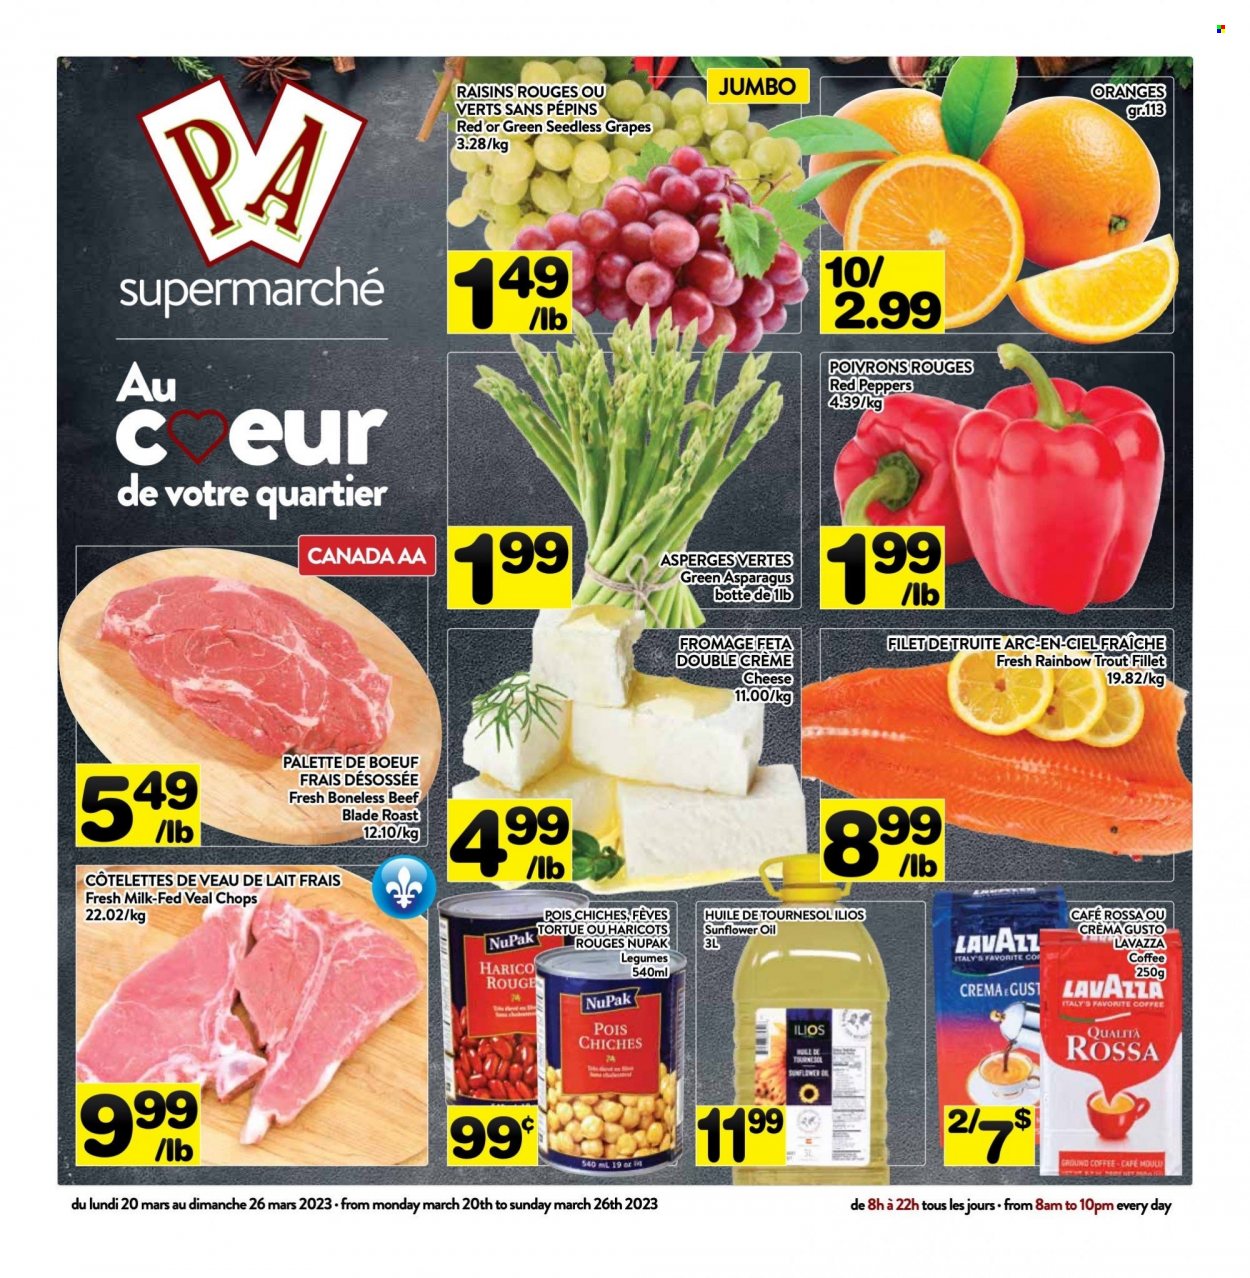 thumbnail - PA Supermarché Flyer - March 20, 2023 - March 26, 2023 - Sales products - asparagus, peppers, red peppers, grapes, seedless grapes, oranges, trout, roast, cheese, feta, milk, Mars, sunflower oil, oil, dried fruit, coffee, ground coffee, Lavazza, veal cutlet, veal meat, raisins. Page 1.